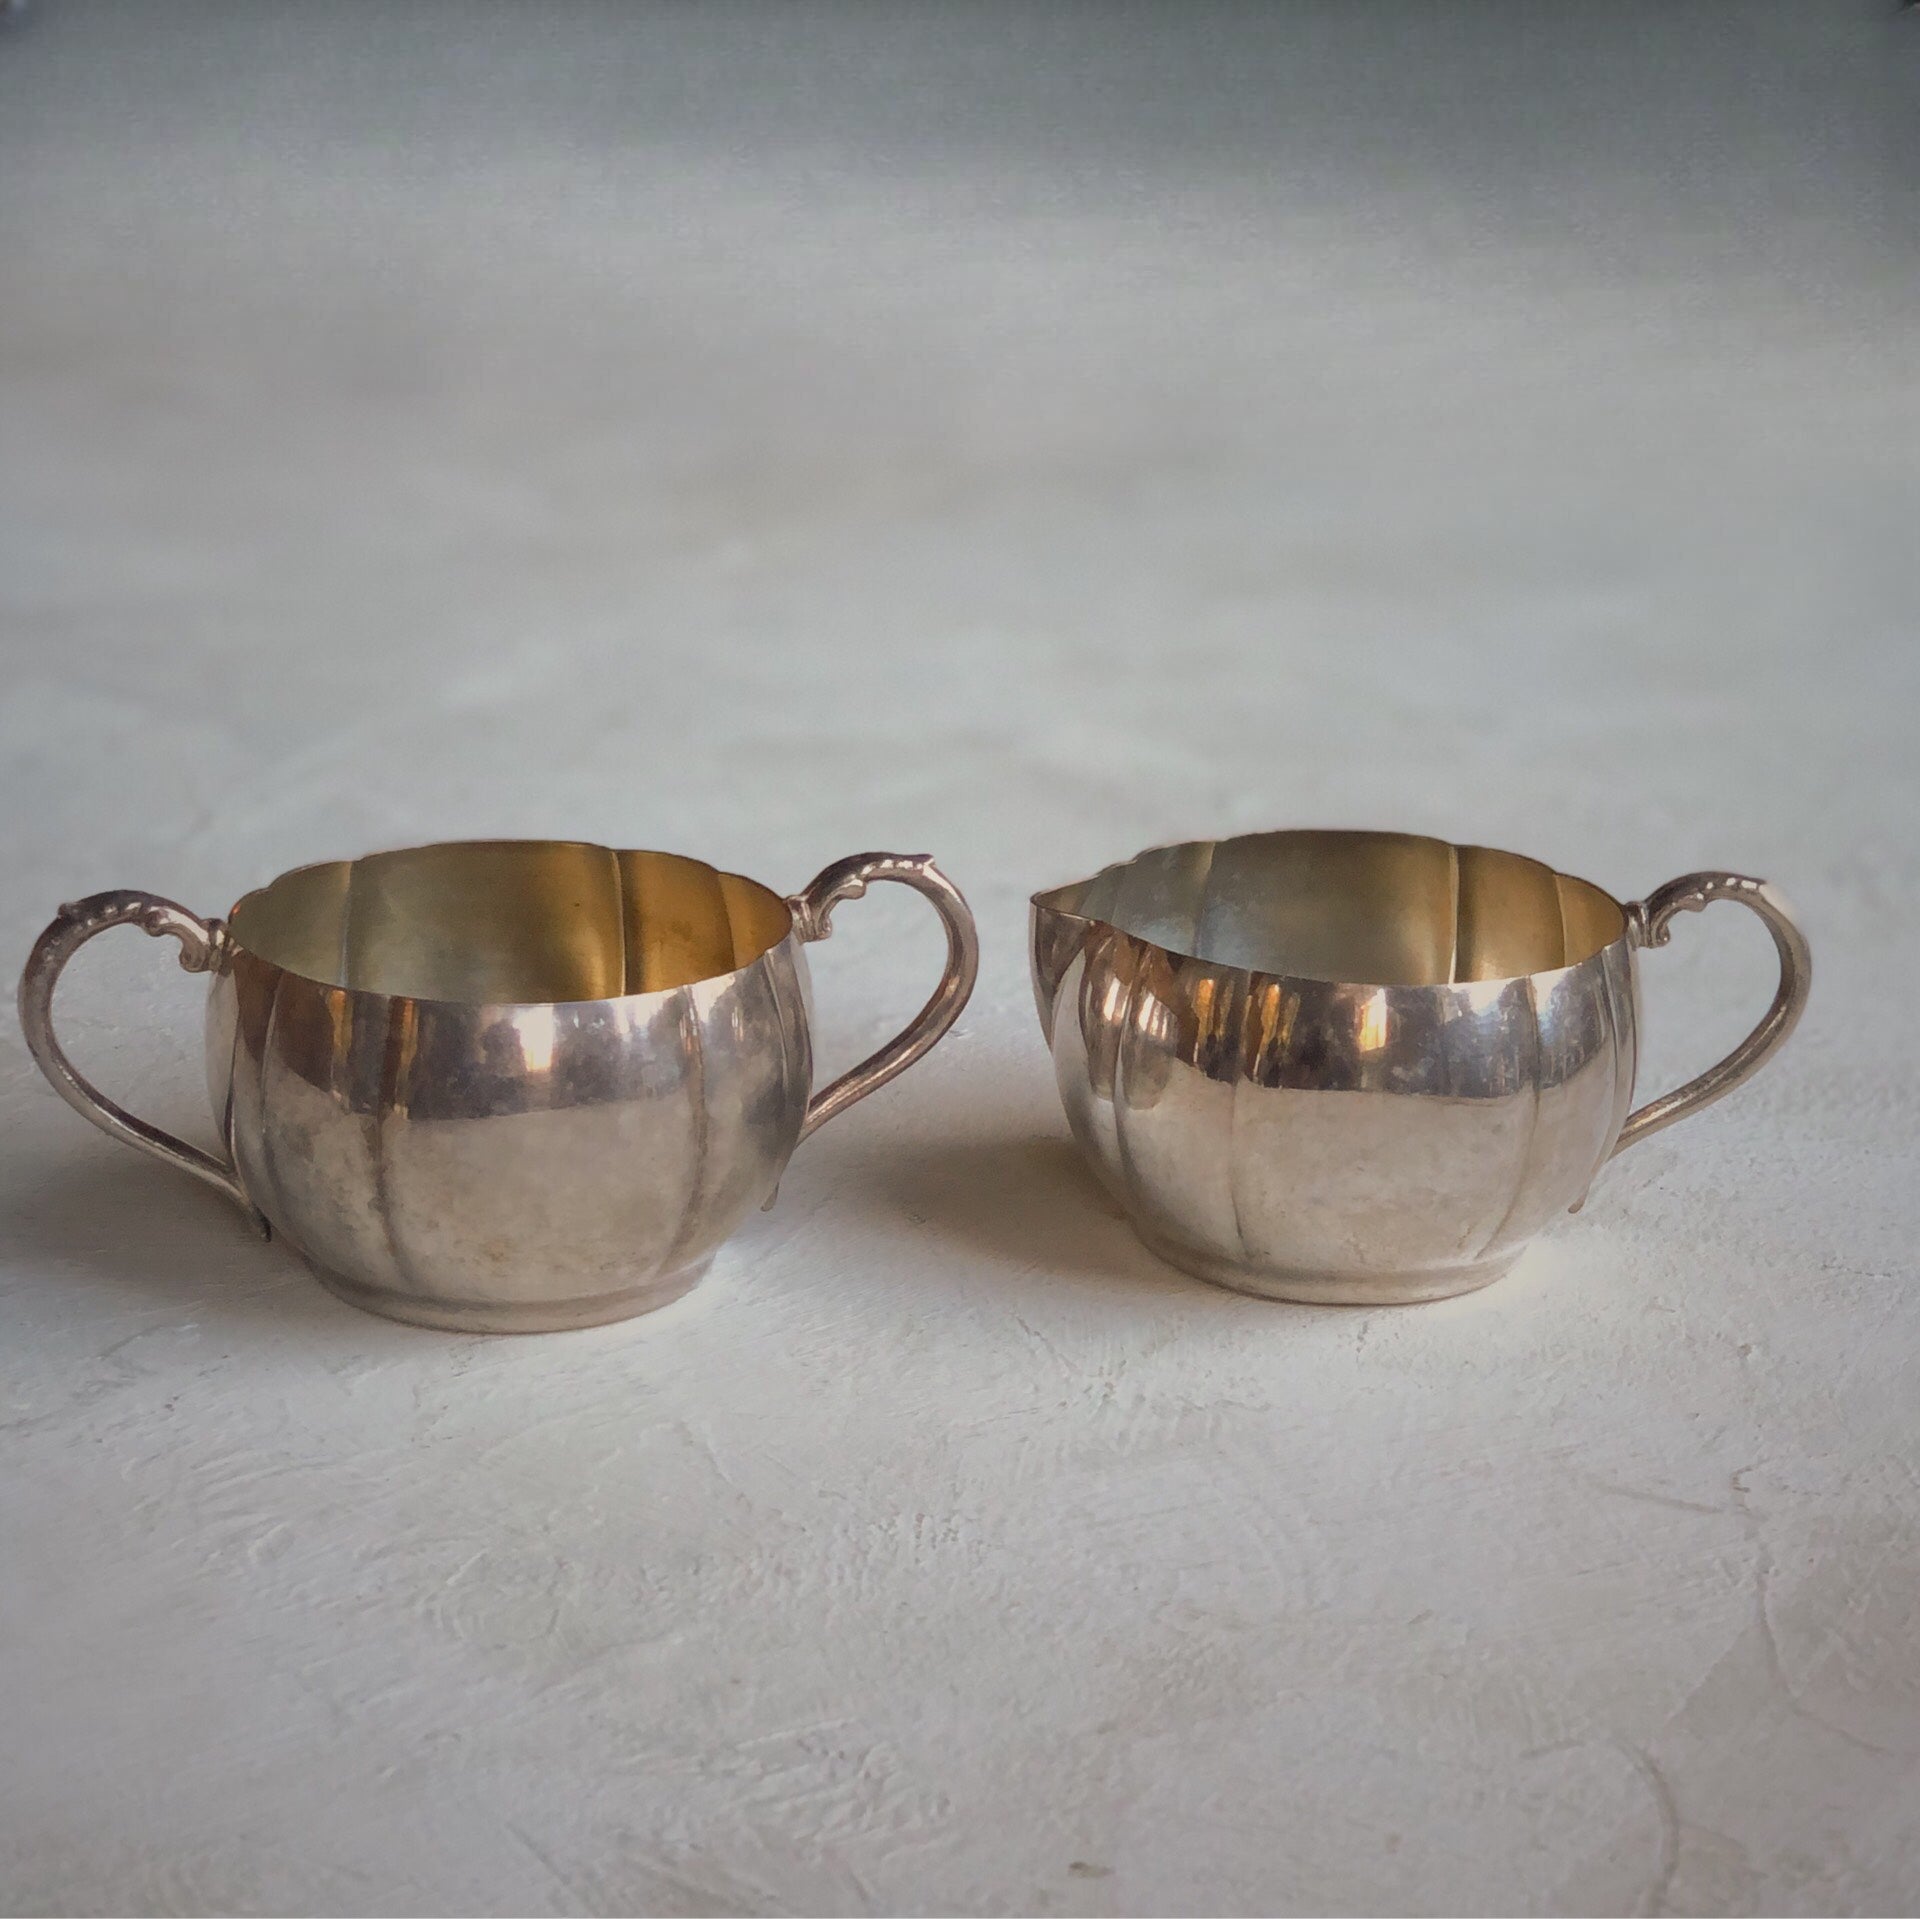 Vintage silver pitcher and sugar bowl.